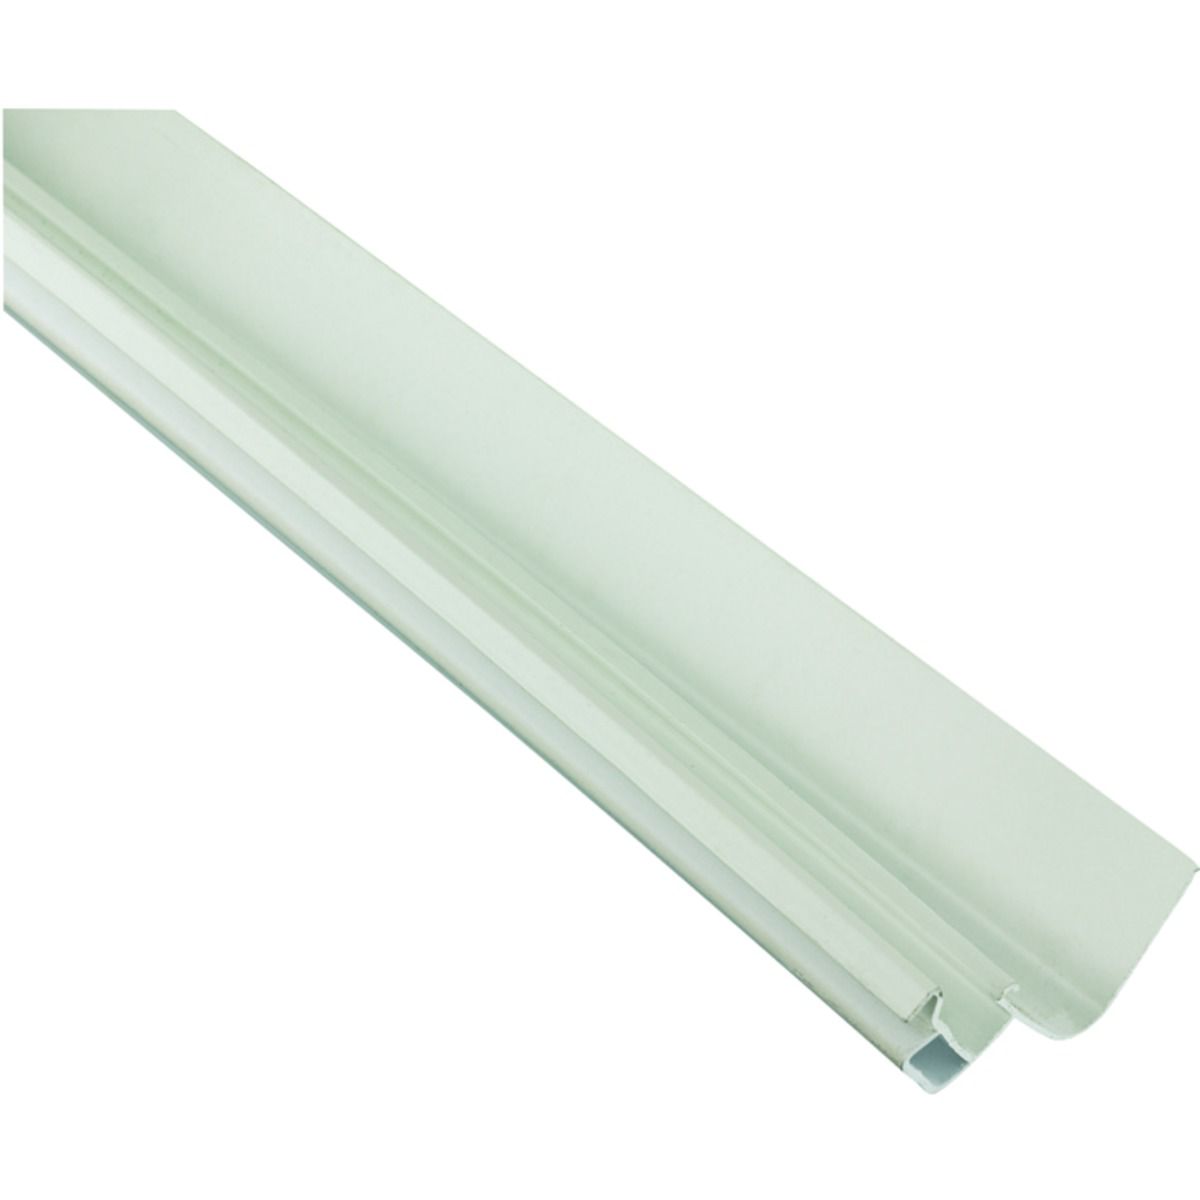 Image of Wickes White Universal Edge Flashing for Polycarbonate Sheets - 3m